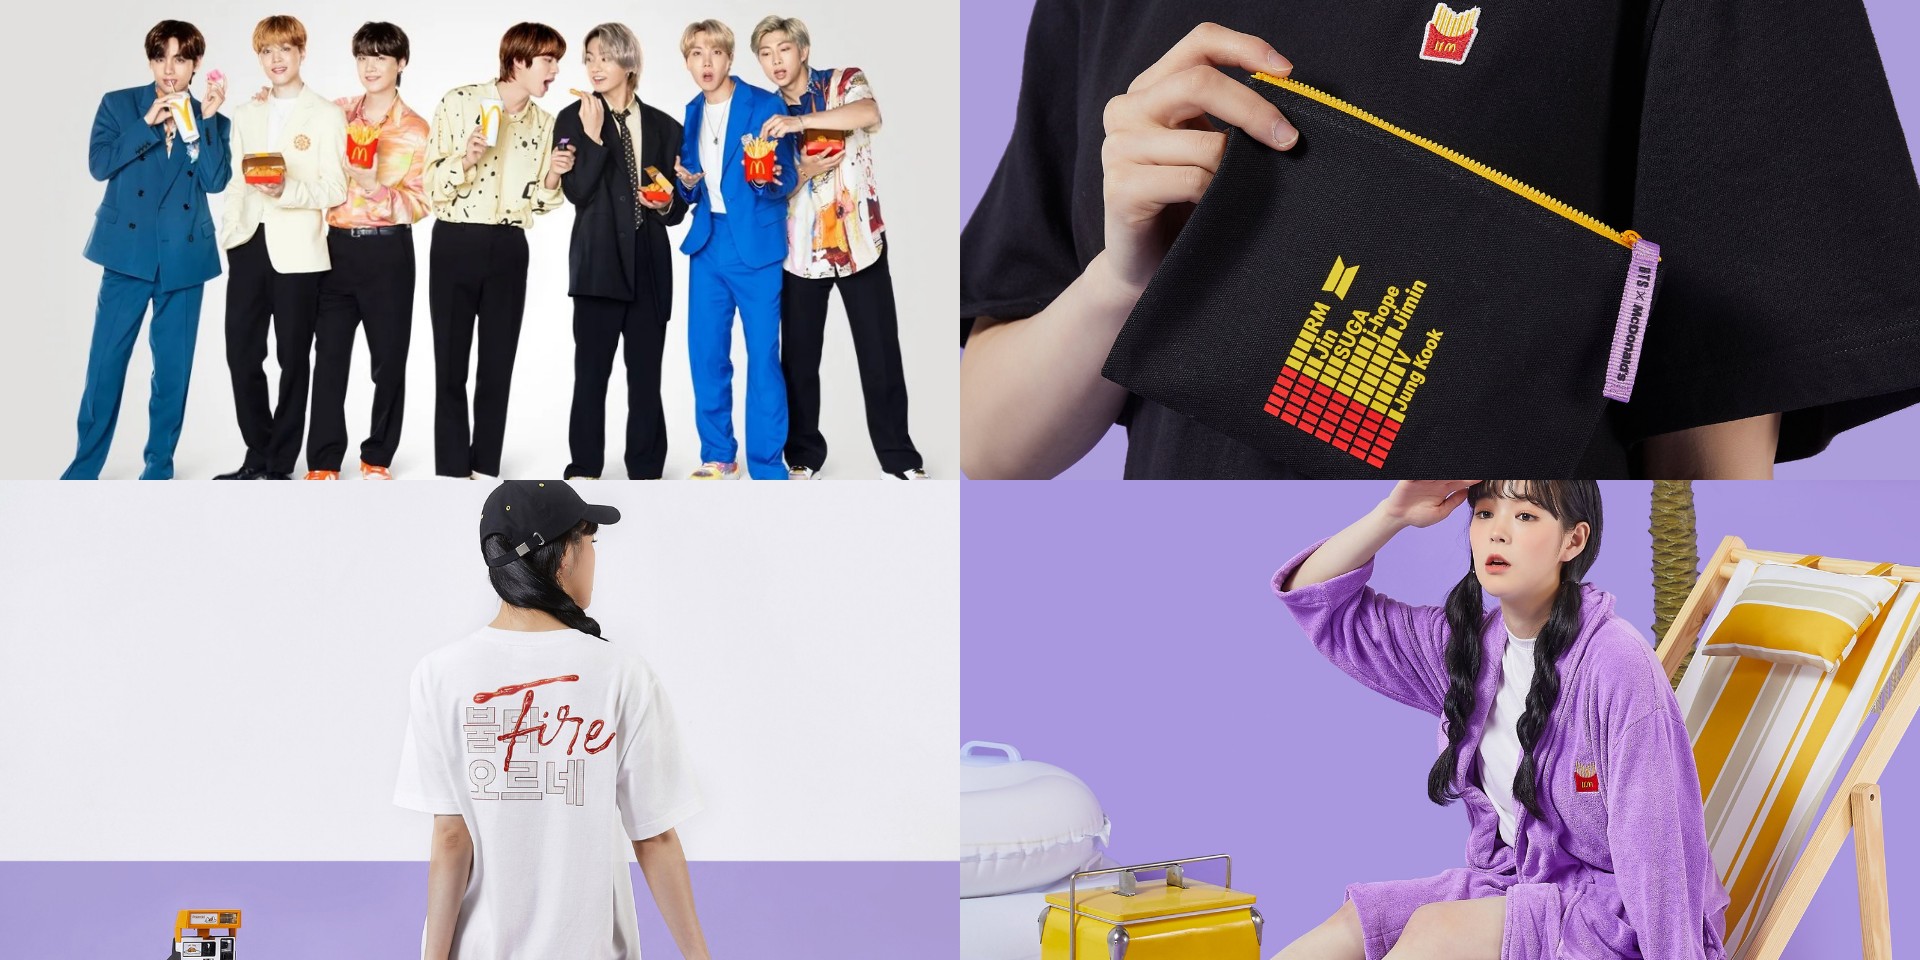 BTS McDonald's Merch Available Now With Meal Deal Purchase